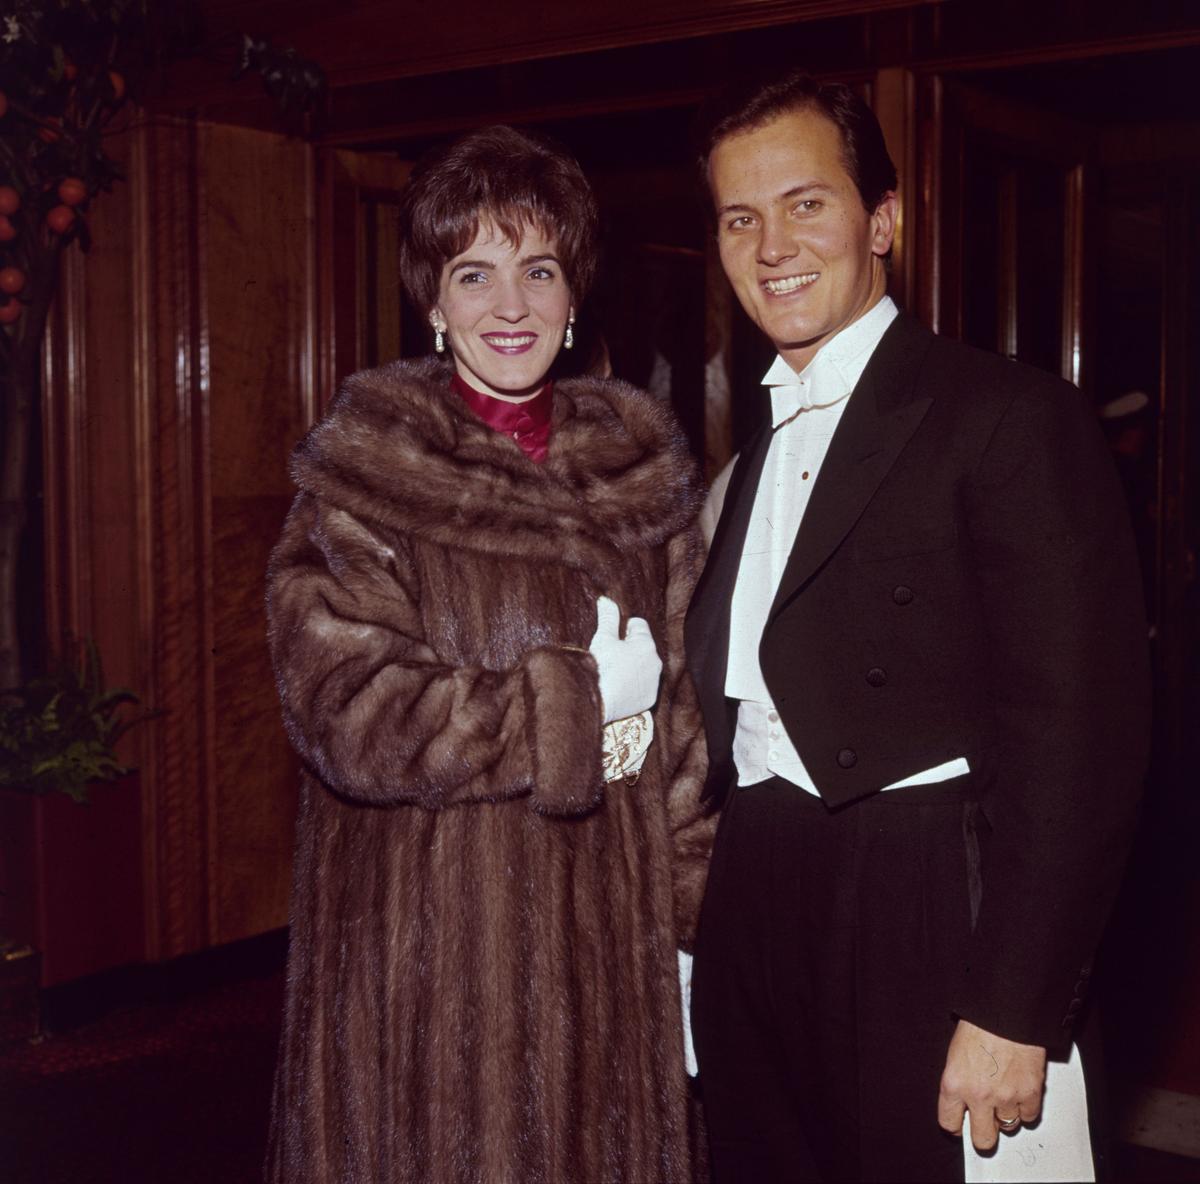 Cleancut American teen idol Pat Boone with his wife, Shirley, in 1962 (George Freston/Fox Photos/Getty Images)